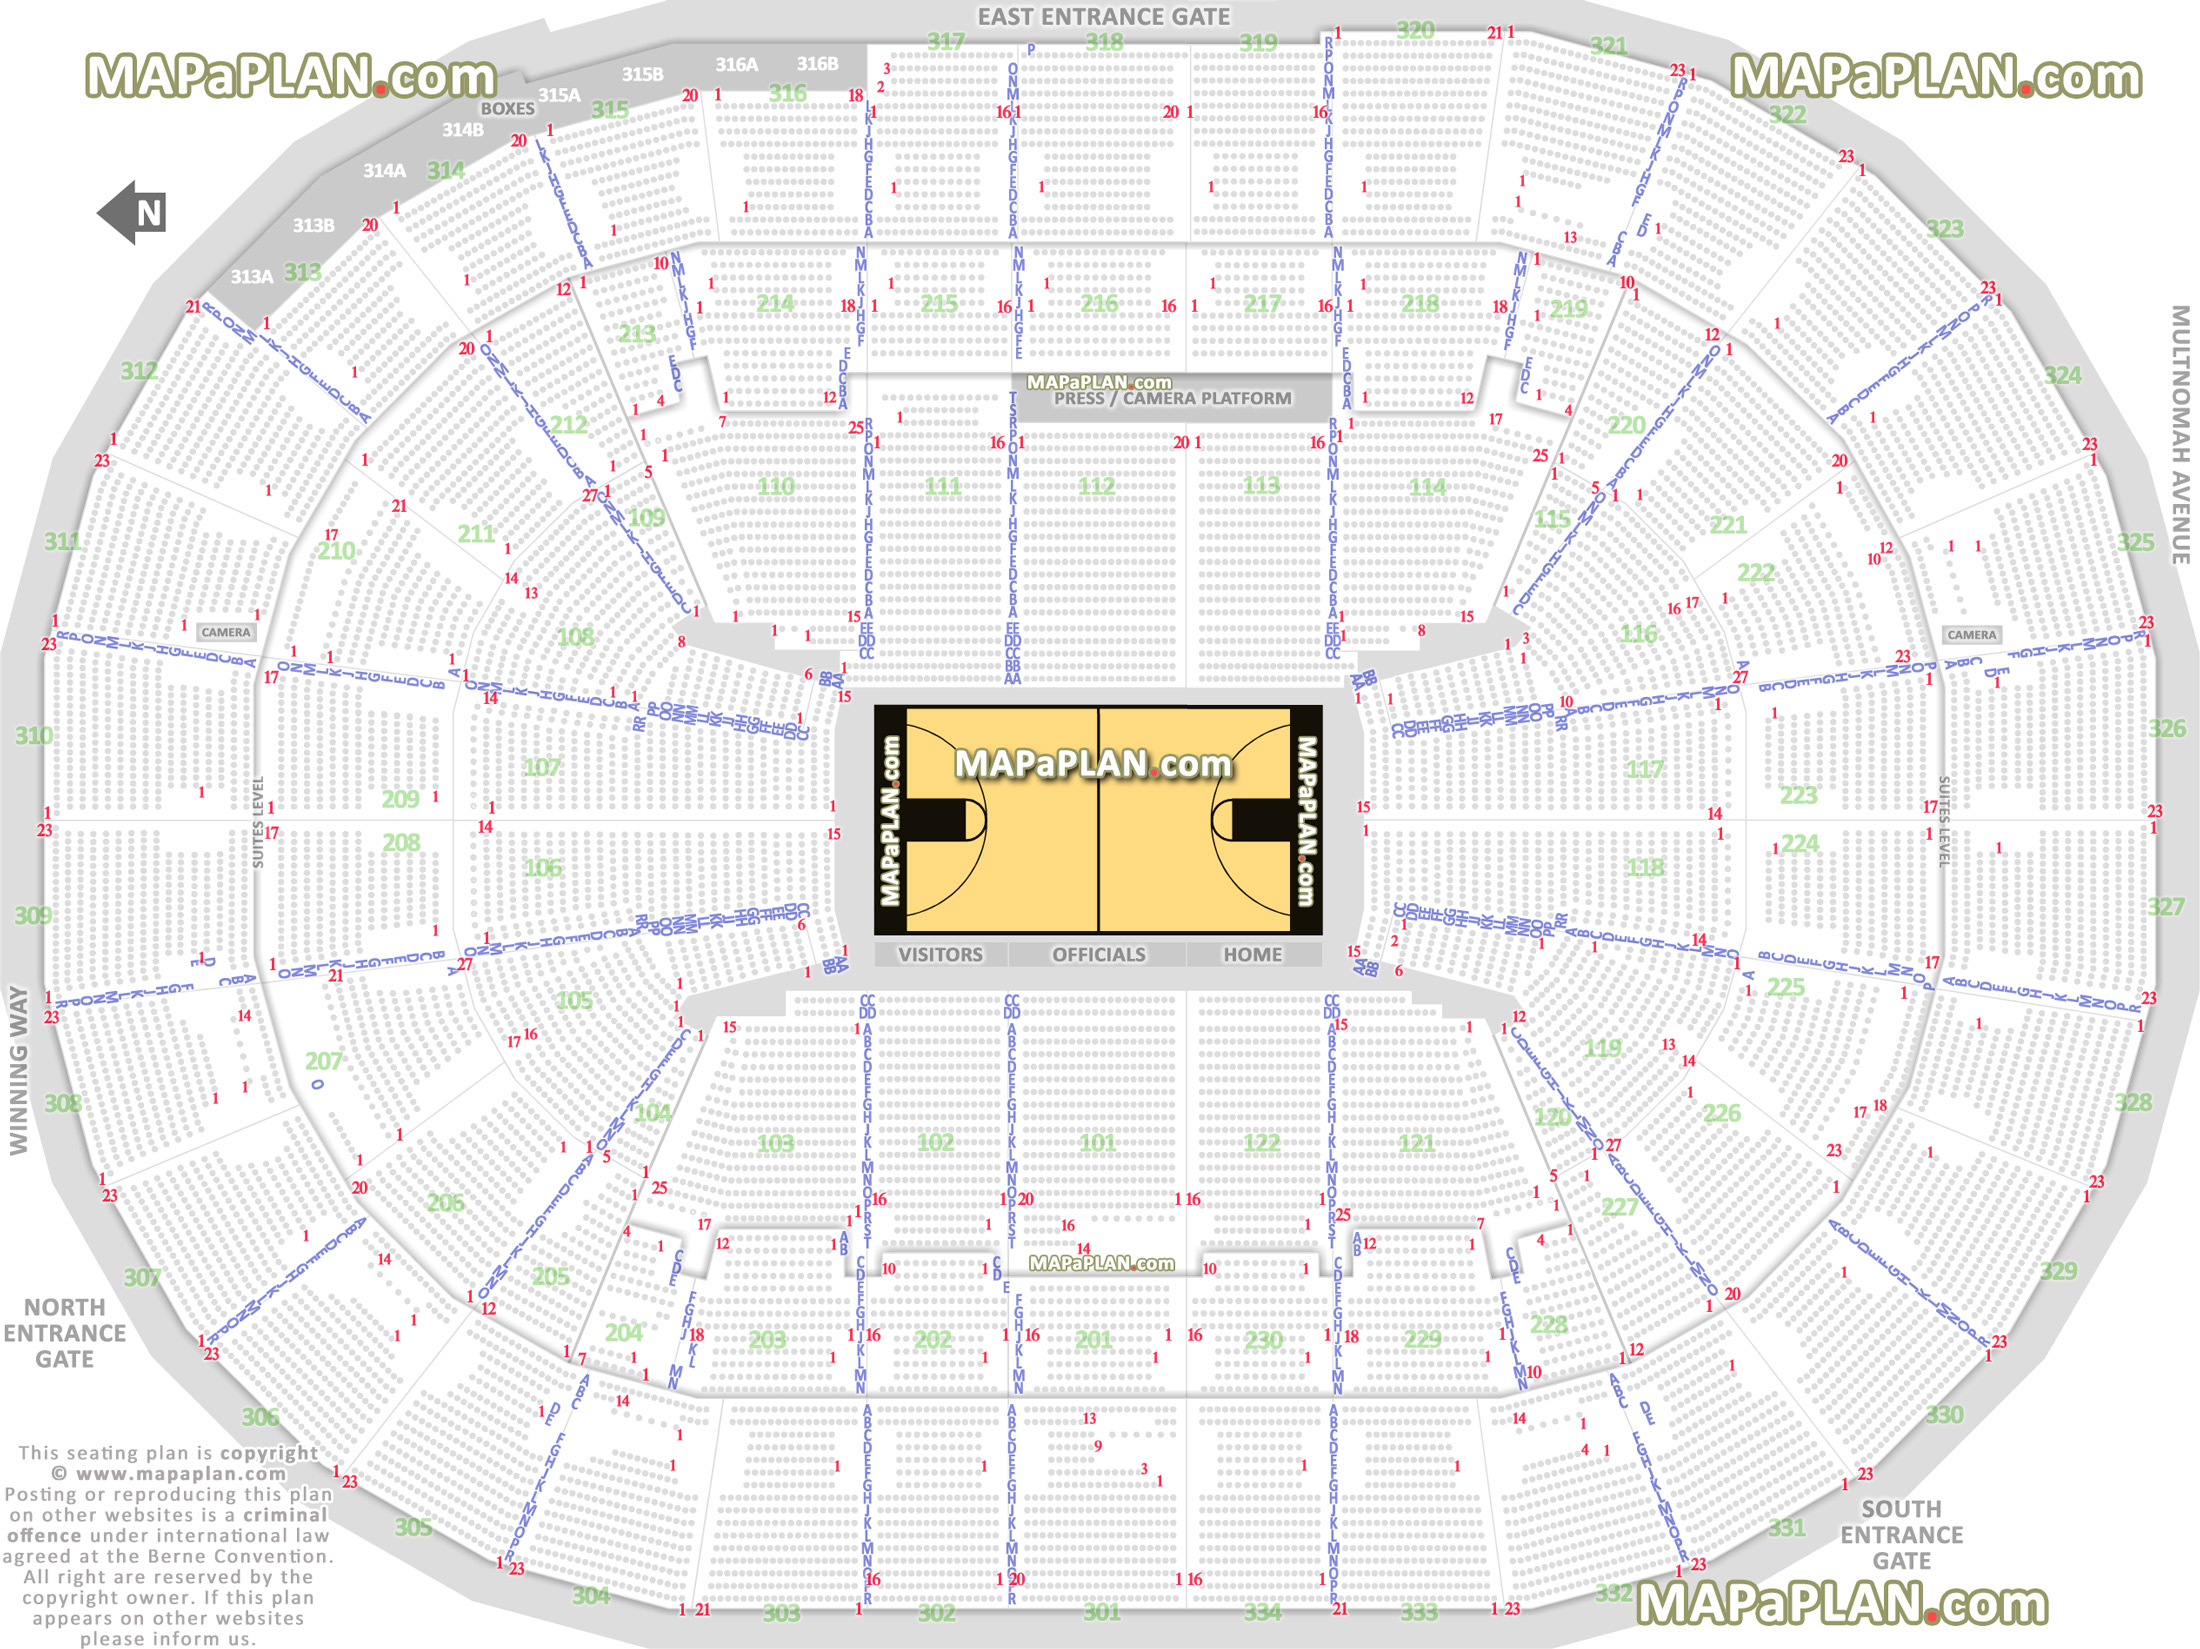 trail blazers nba basketball game arena stadium individual find seat locator how rows numbered sideline courtside blazer boxes kuni lexus club levels Portland Moda Center seating chart